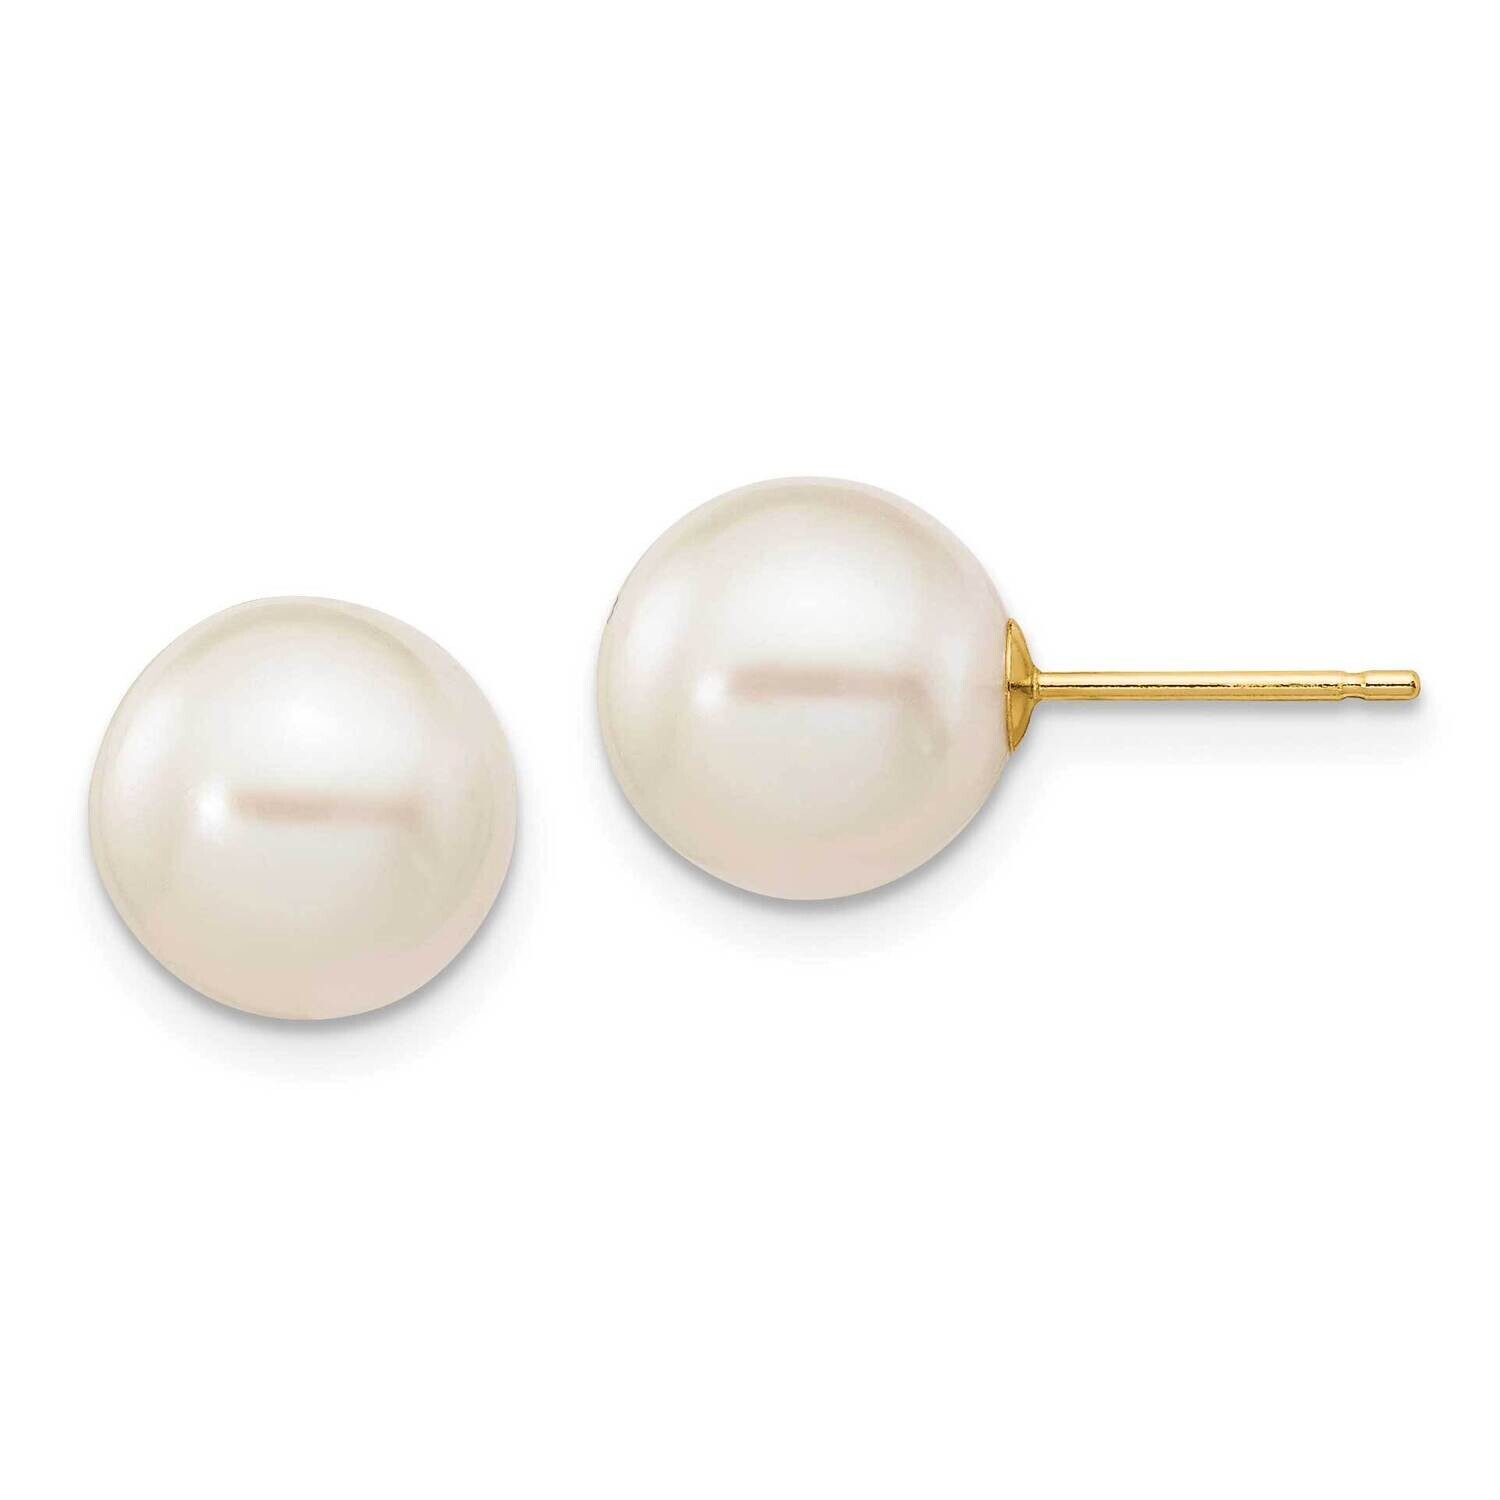 9-10mm White Round Freshwater Cultured Pearl Stud Post Earrings 10k Gold 10X90PW